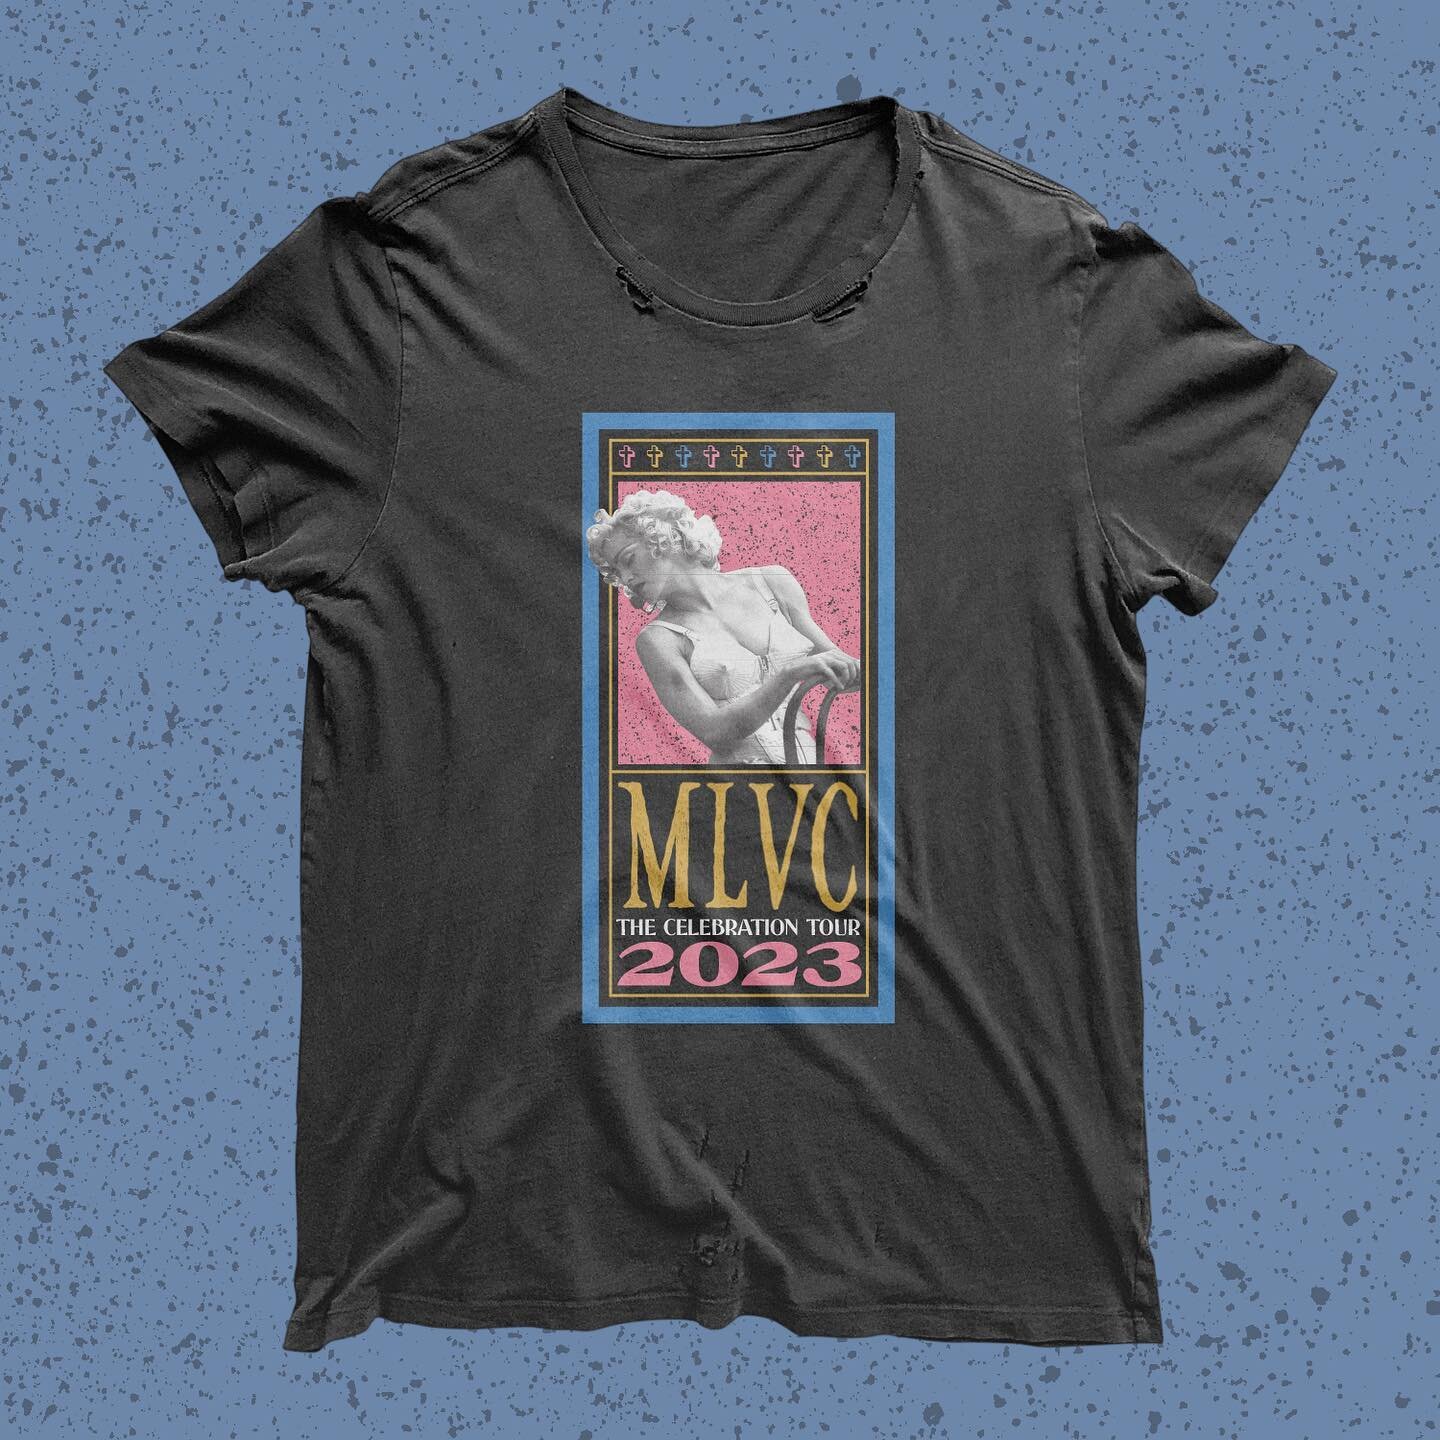 Over the next few days, I&rsquo;m going to post some mock-ups of @madonna merch that I&rsquo;d love to see happen for the Celebration Tour. This first one is inspired the Blond Ambition World Tour. Would you wear?